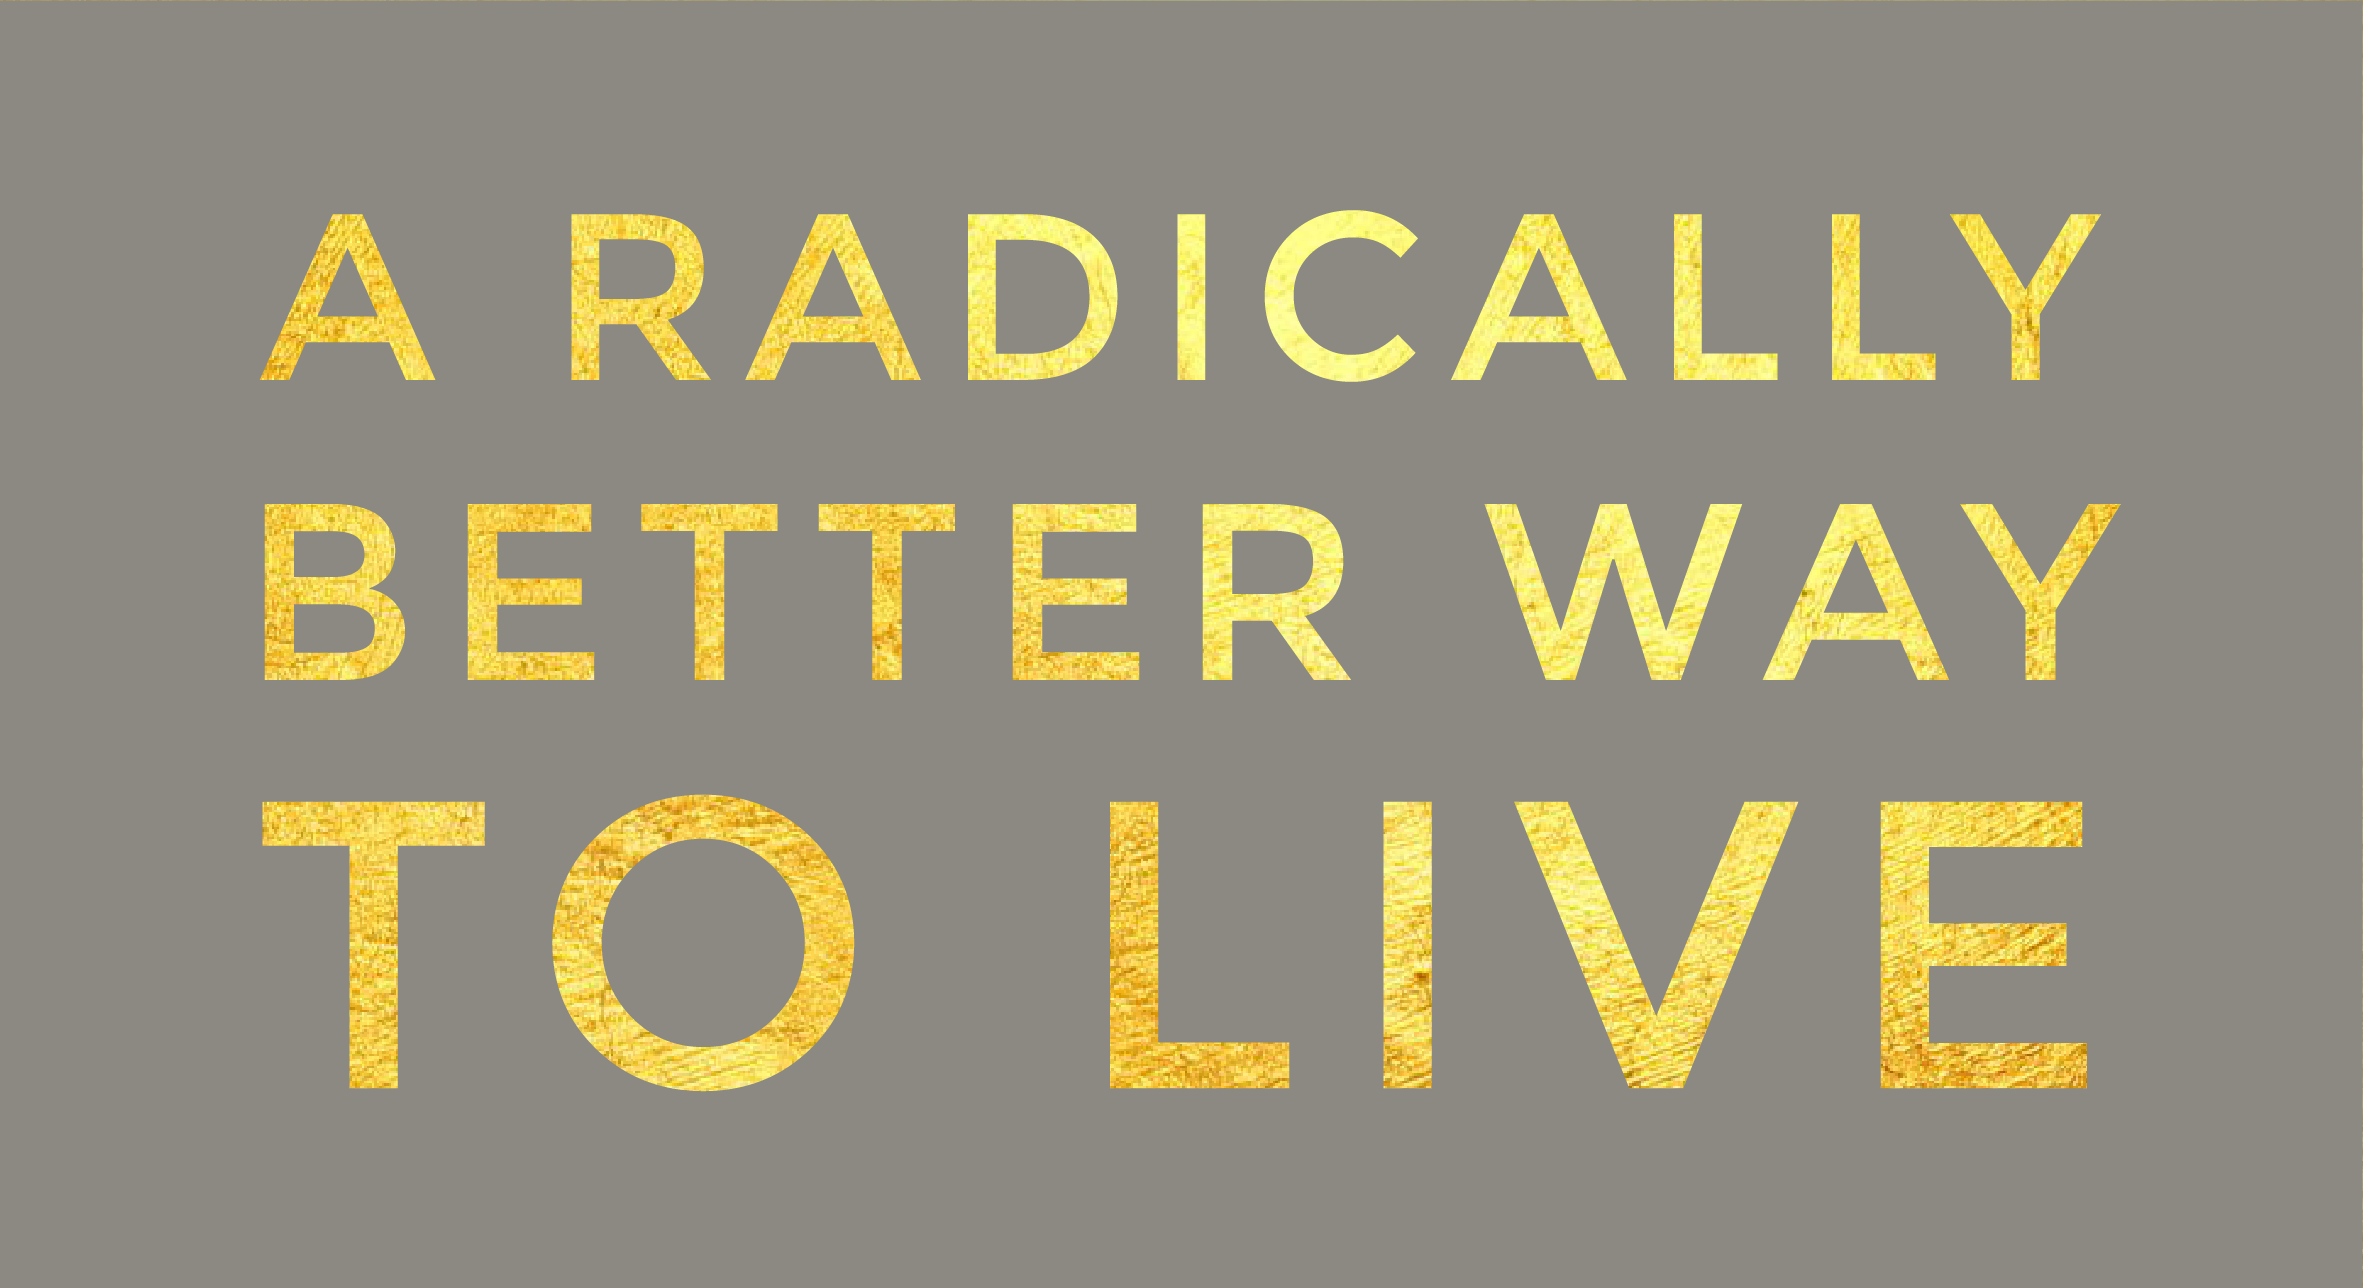 A radically better way to live